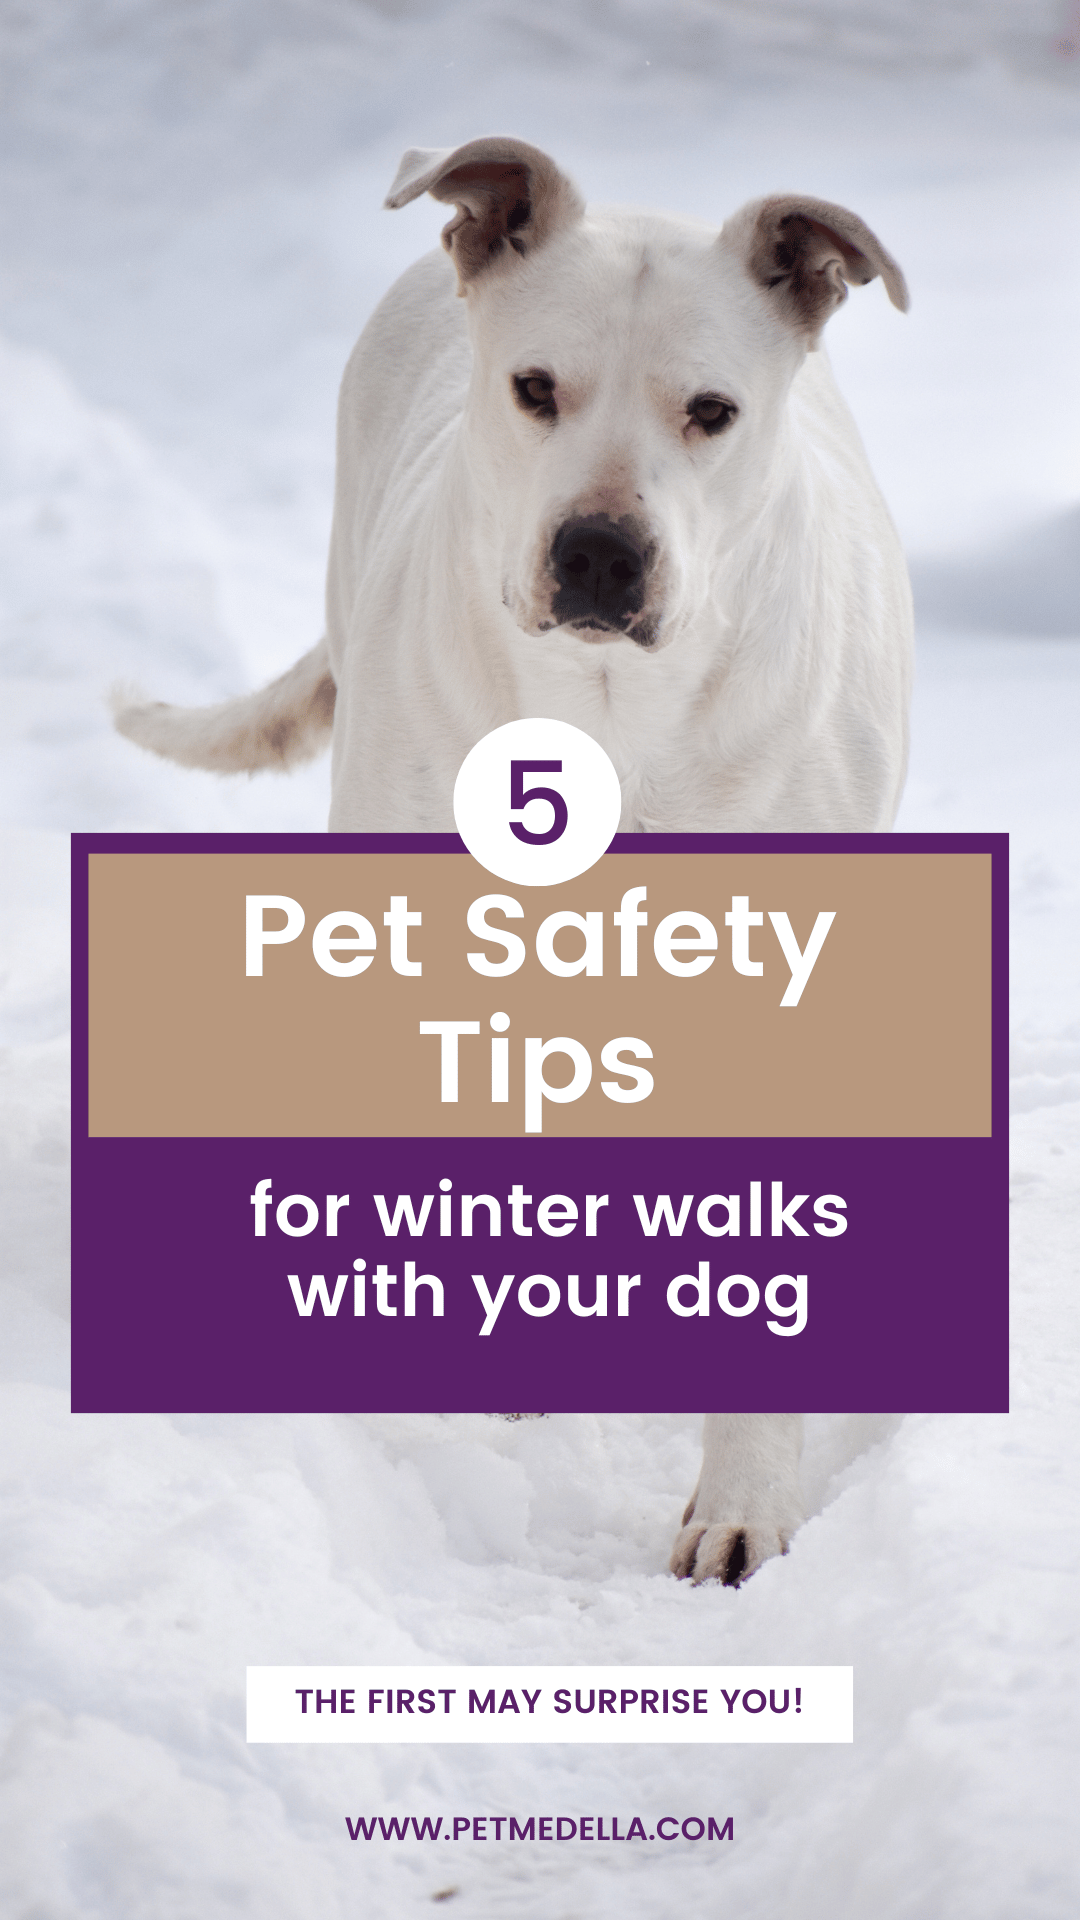 5 tips to keep your dog safe on winter walks